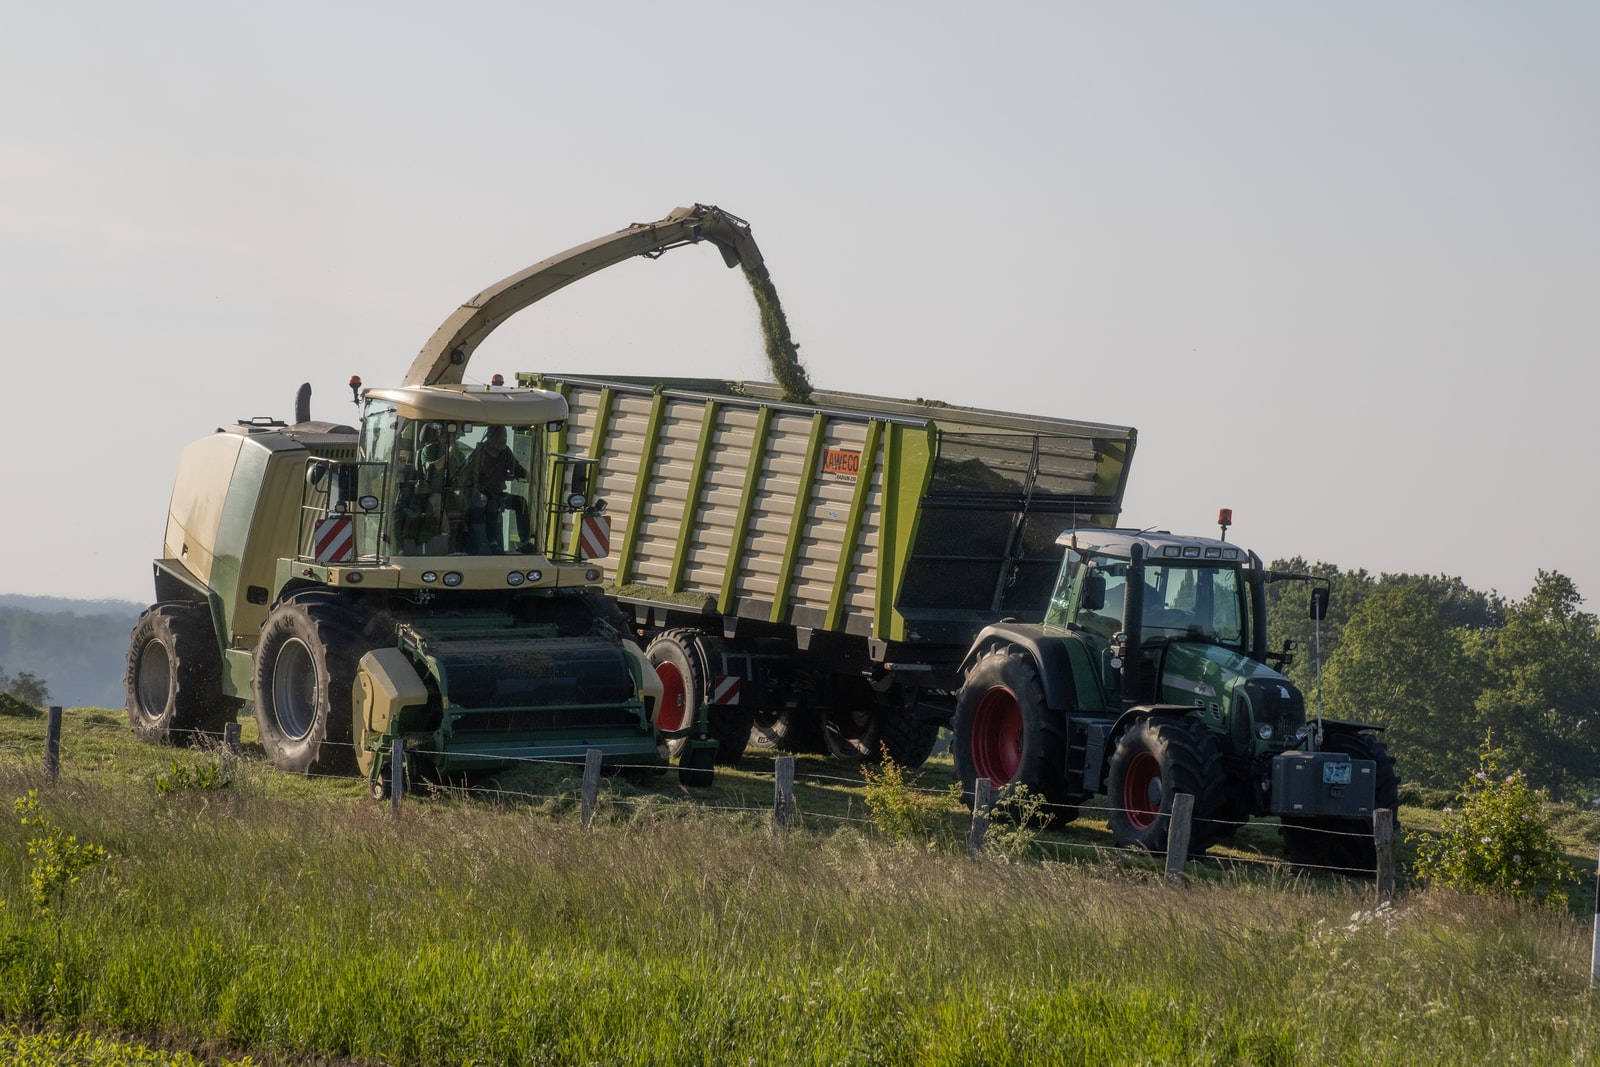 A Diligent Farmer Operating A Thresher On A Tractor In The Field.